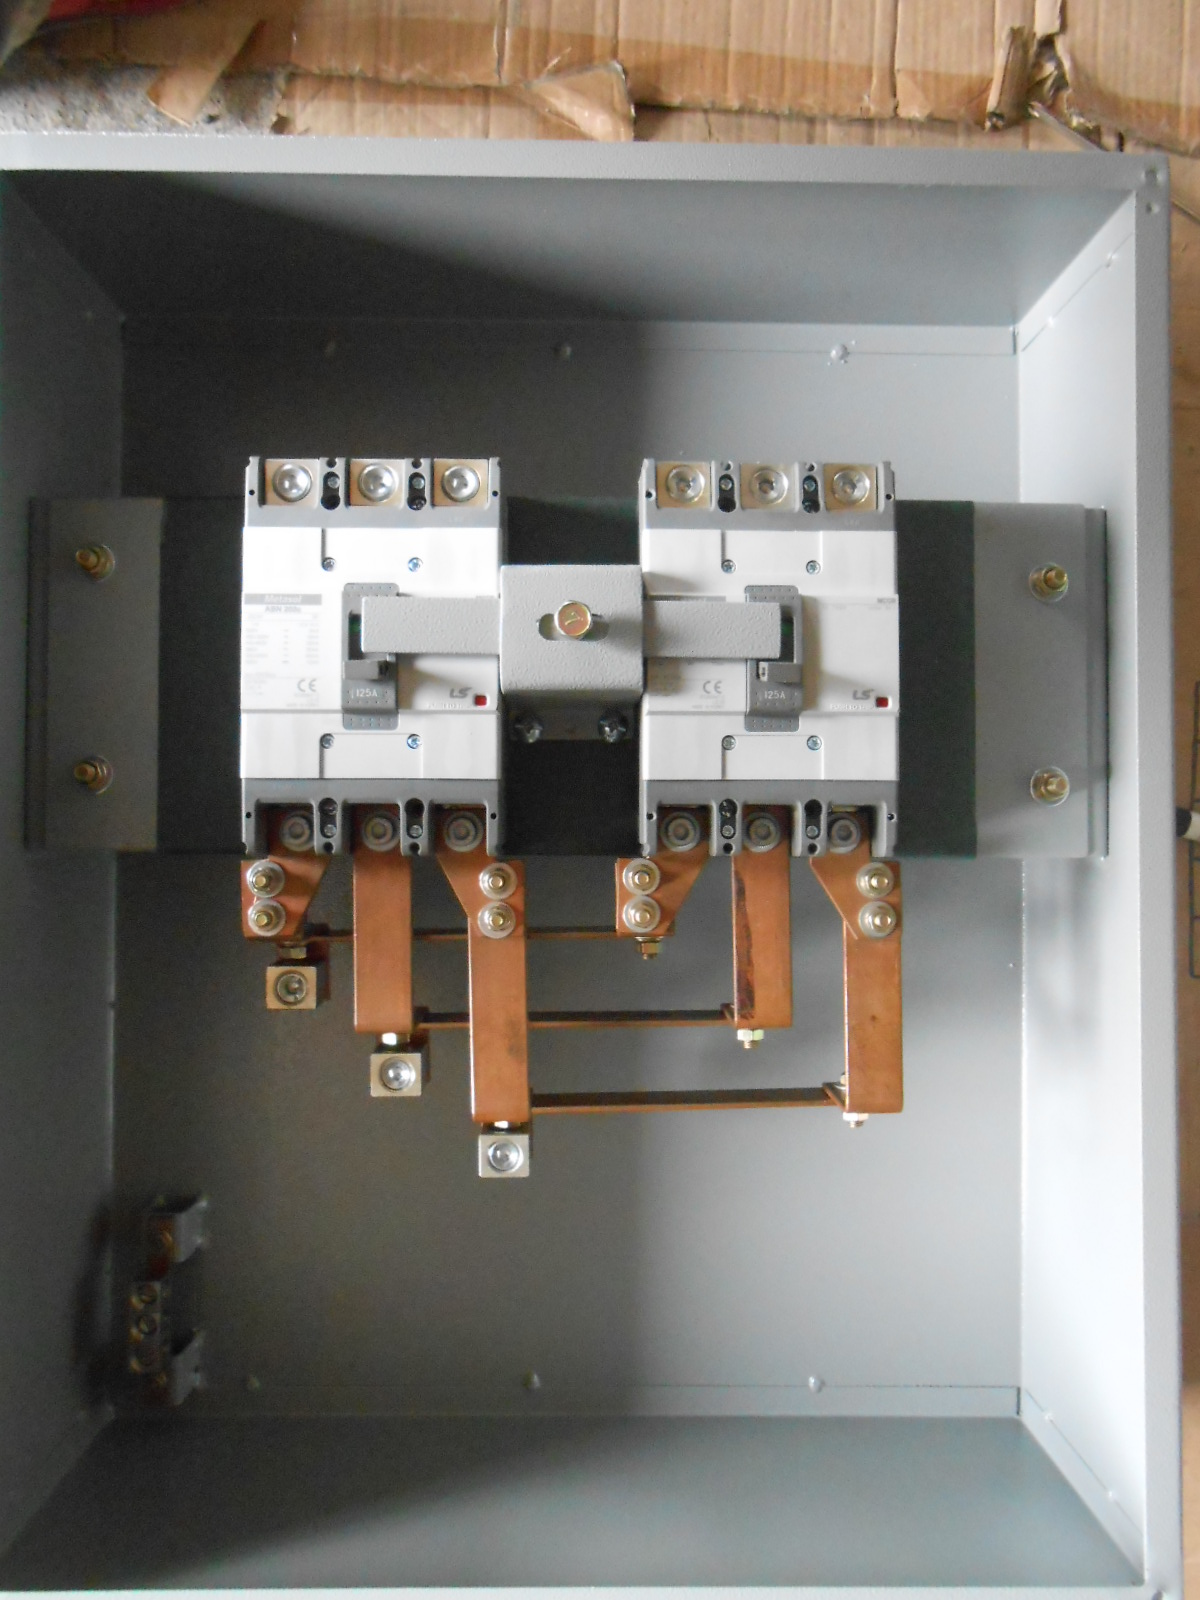 How Does a Manual Transfer Switch Work?